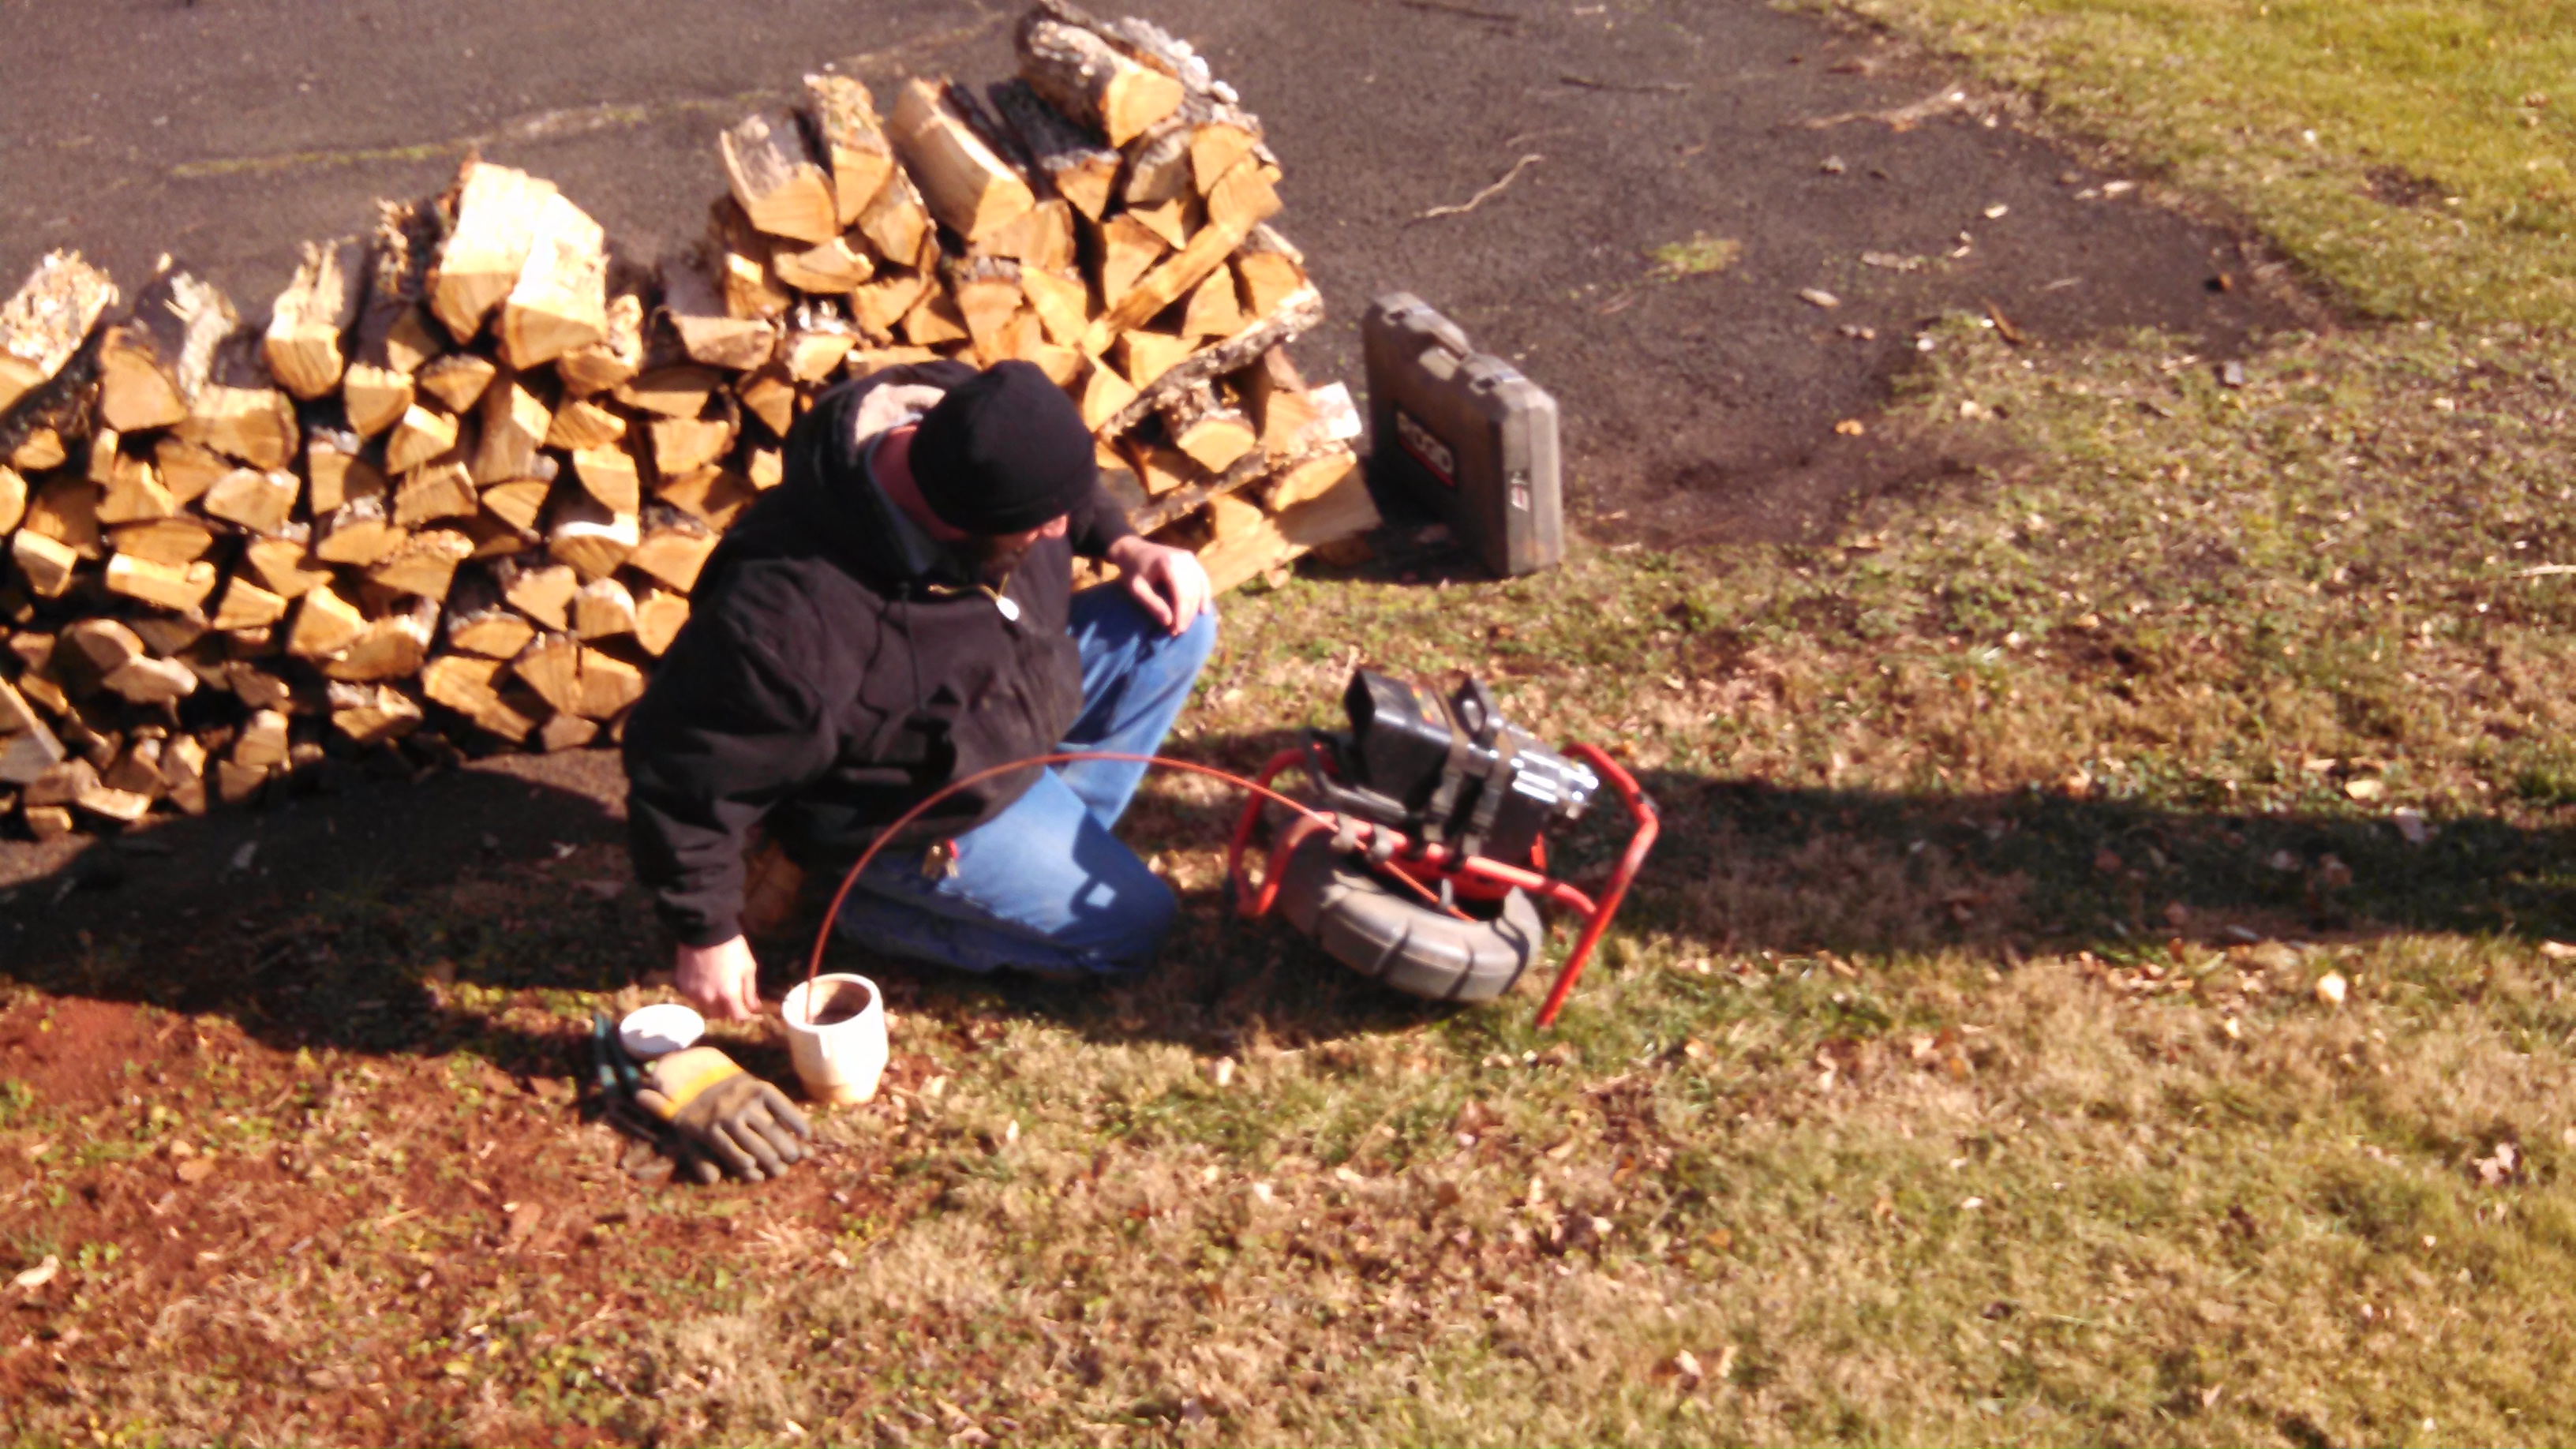 Inserting the probe/camera into the septic line.